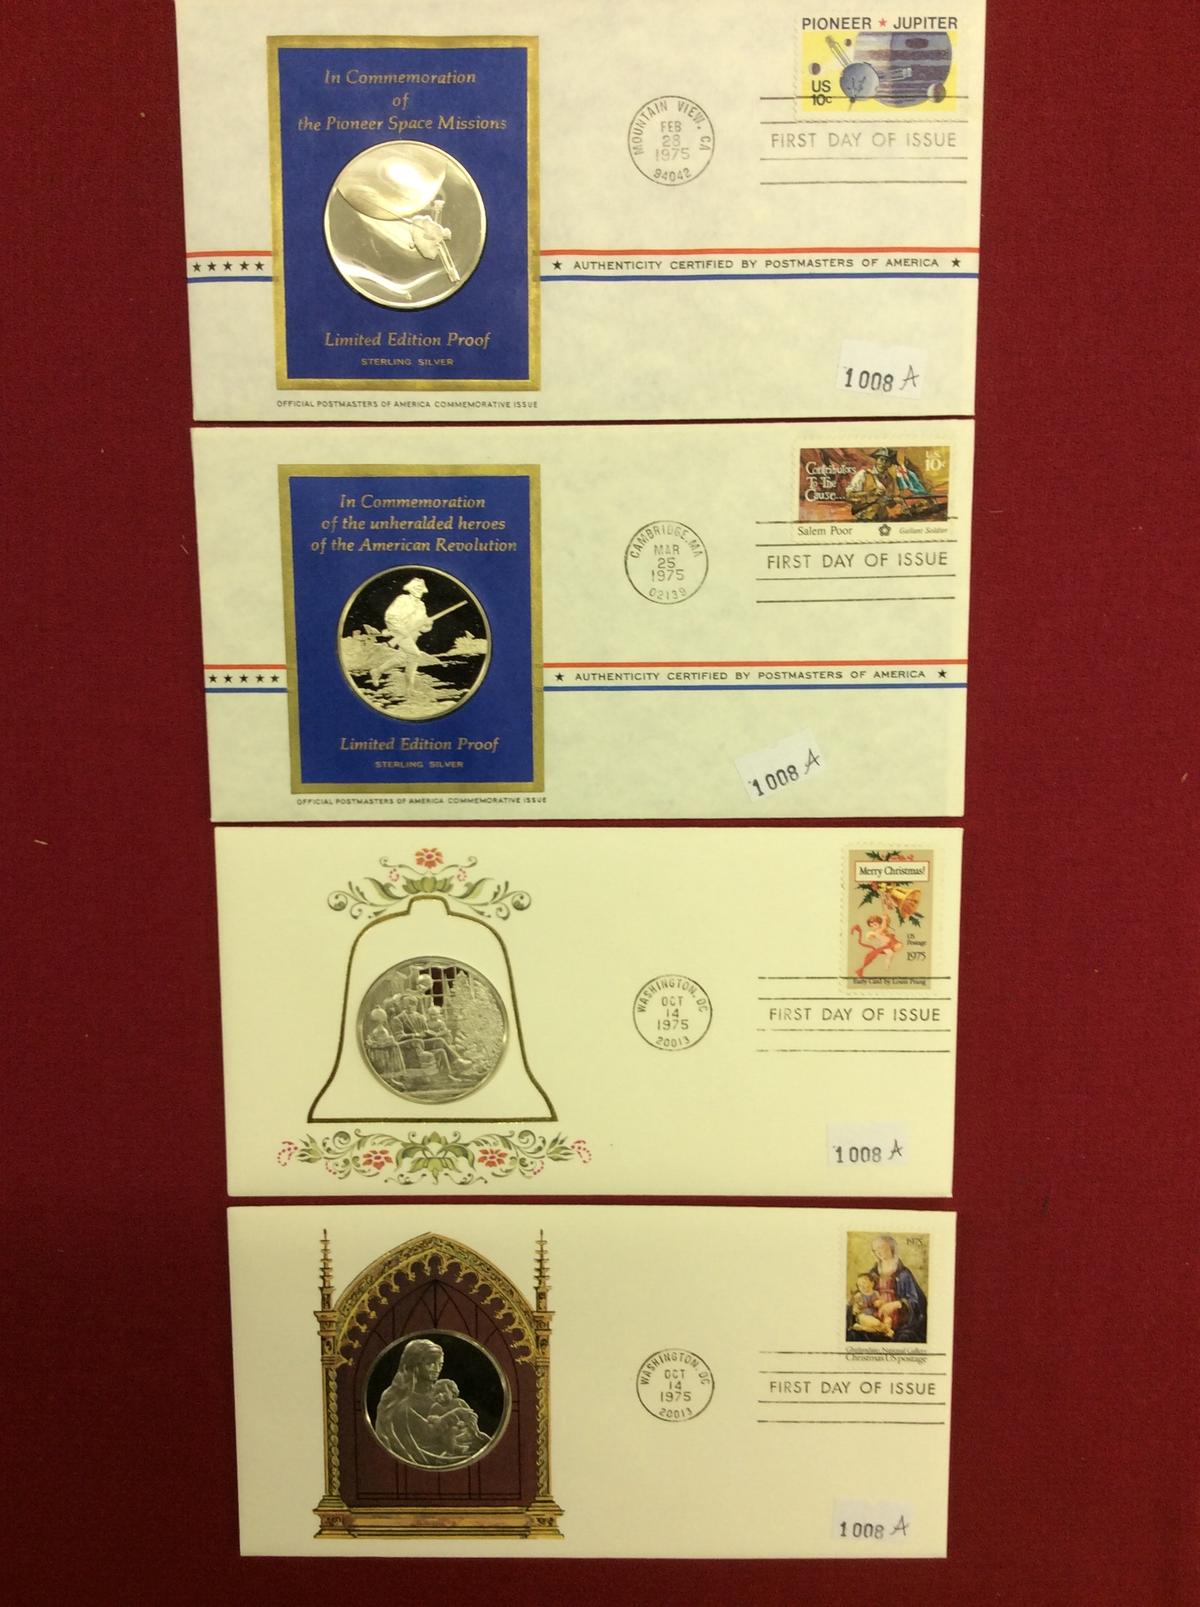 (4) 1975 Postmasters of America-Commemorative Issue Limited Edition Sterlin